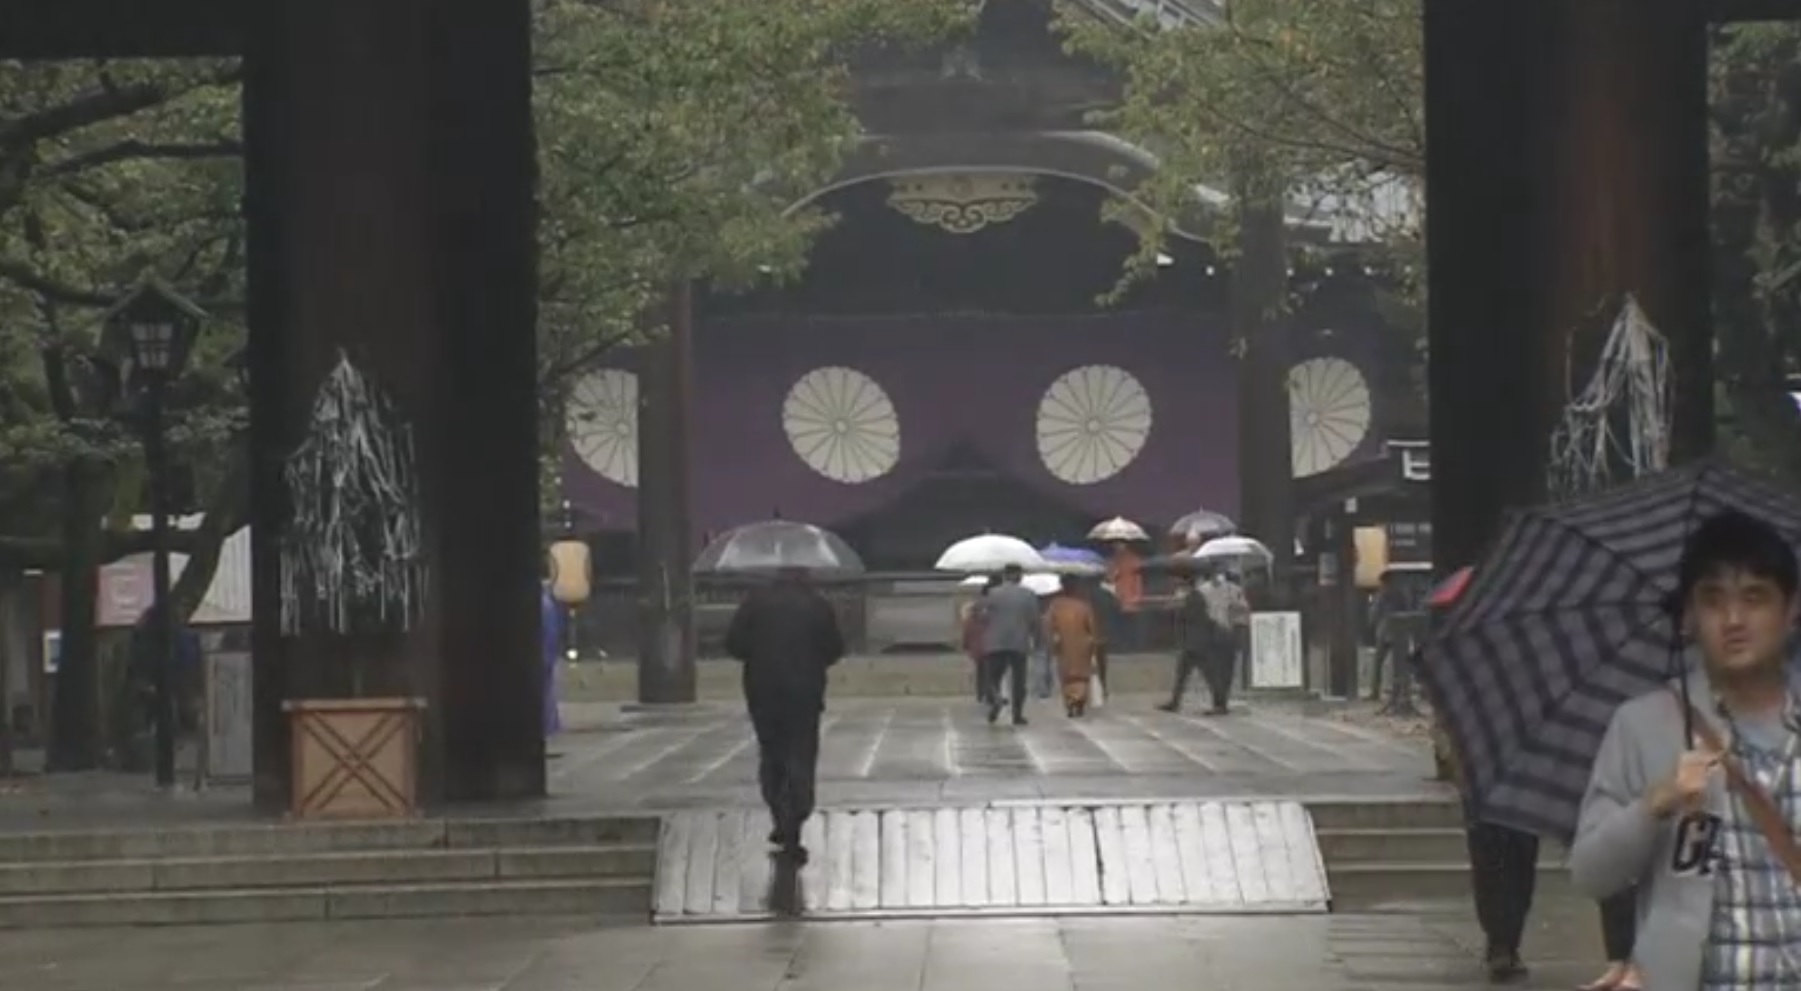 Japanese Prime Minister Shinzo Abe sends ritual offering to the controversial Yasukuni shrine for war dead. ( Photo grabbed from Reuters video )